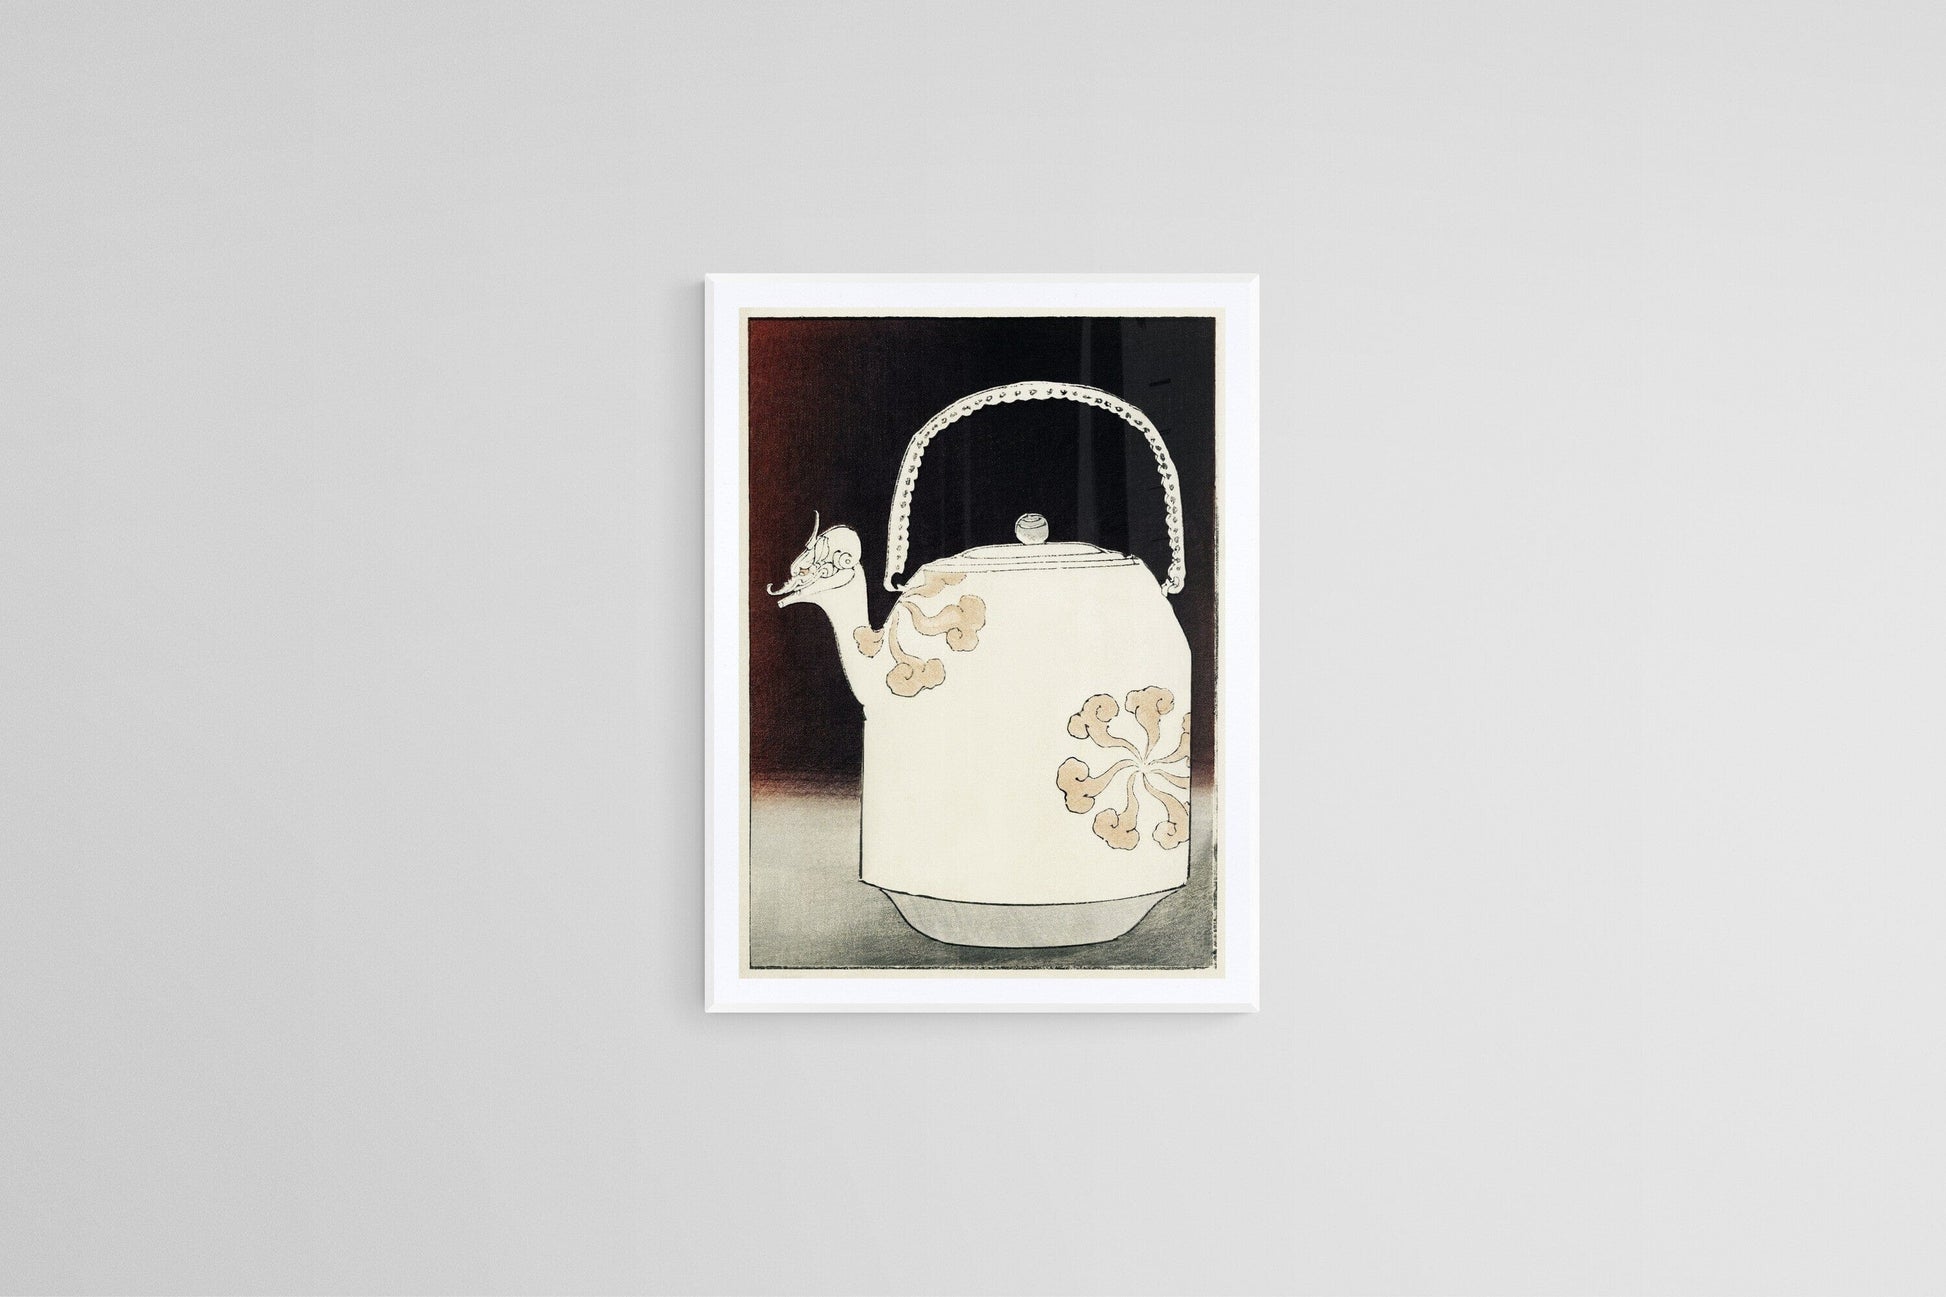 East Asian inspired kettle (1890s) | Japanese kitchen art print  The Trumpet Shop   